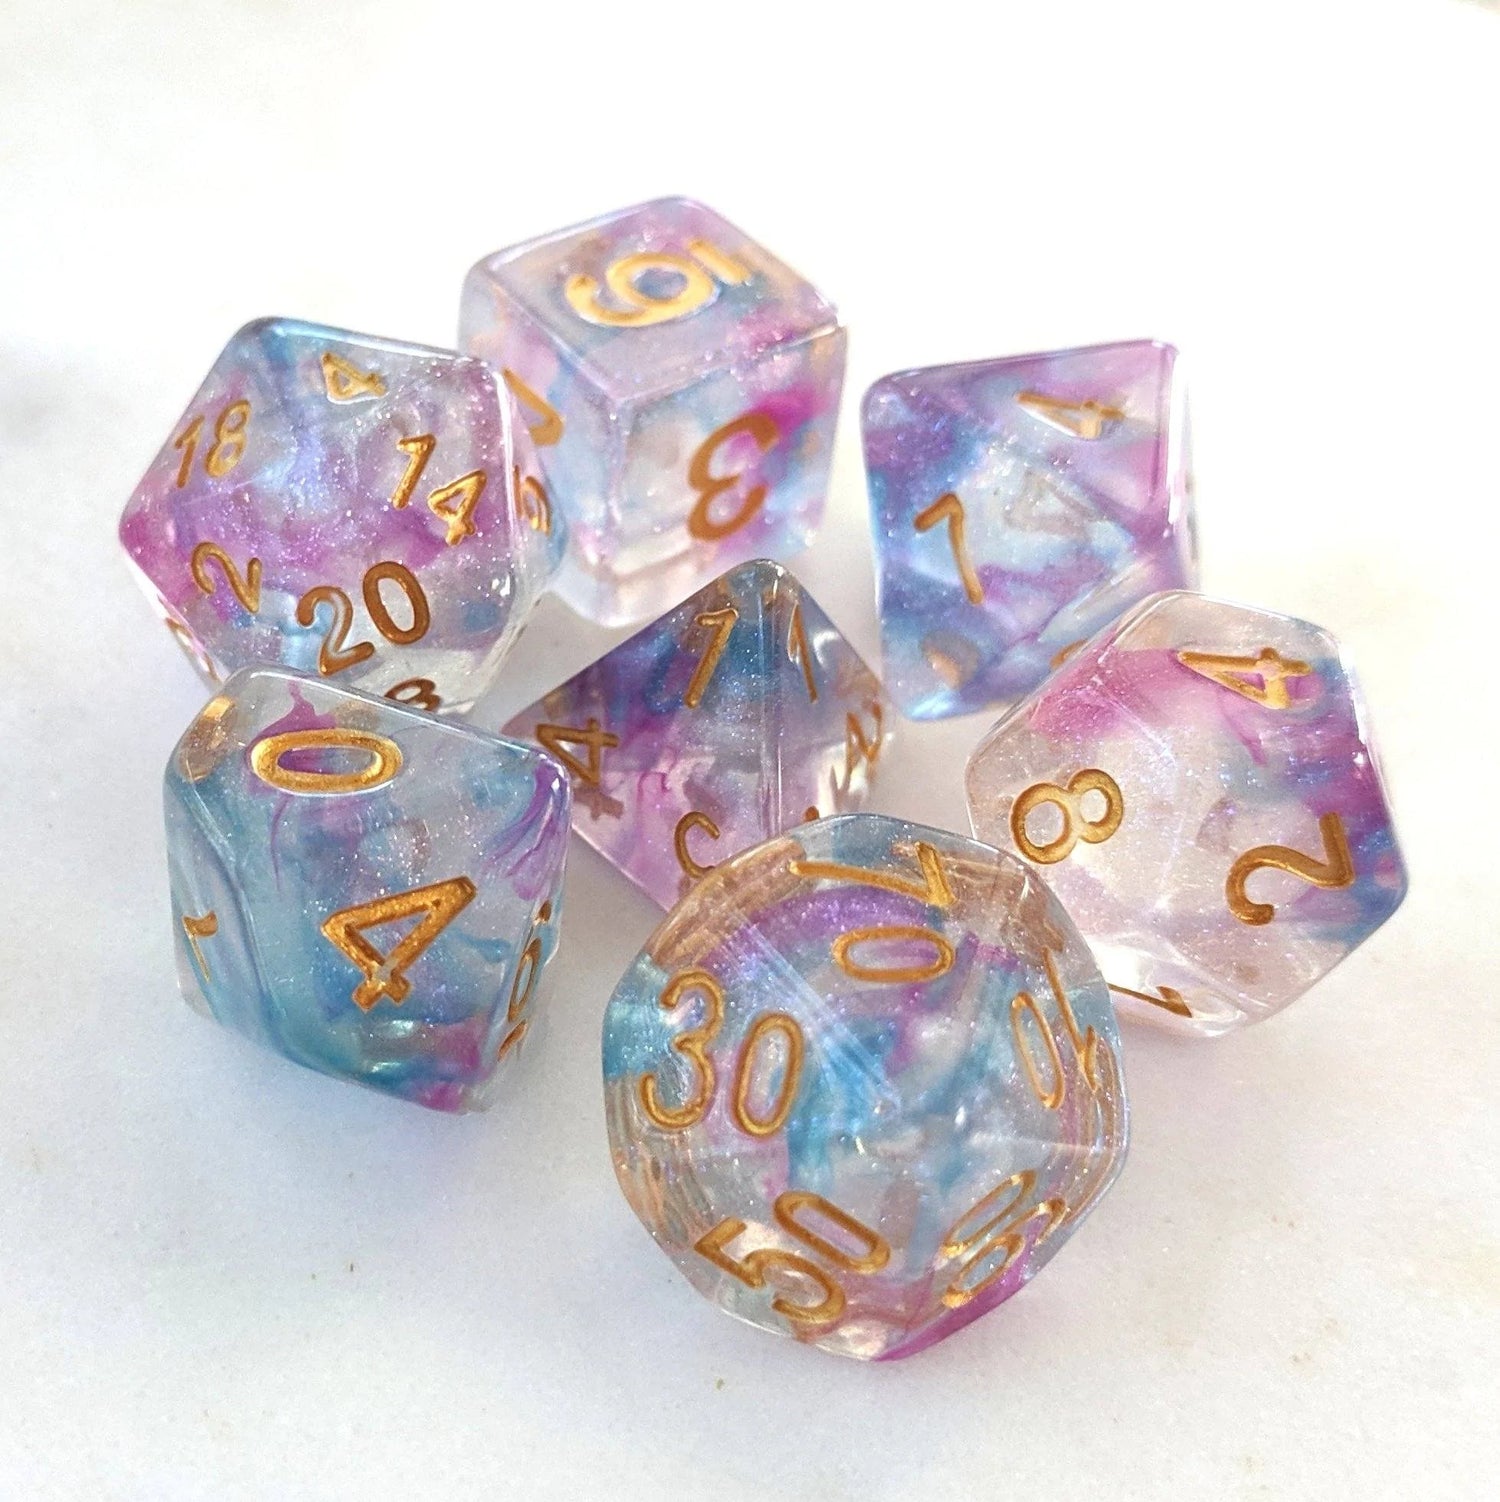 Shimmering Reflection - 7 Dice Set (Purple Translucent Glitter) - The Fourth Place